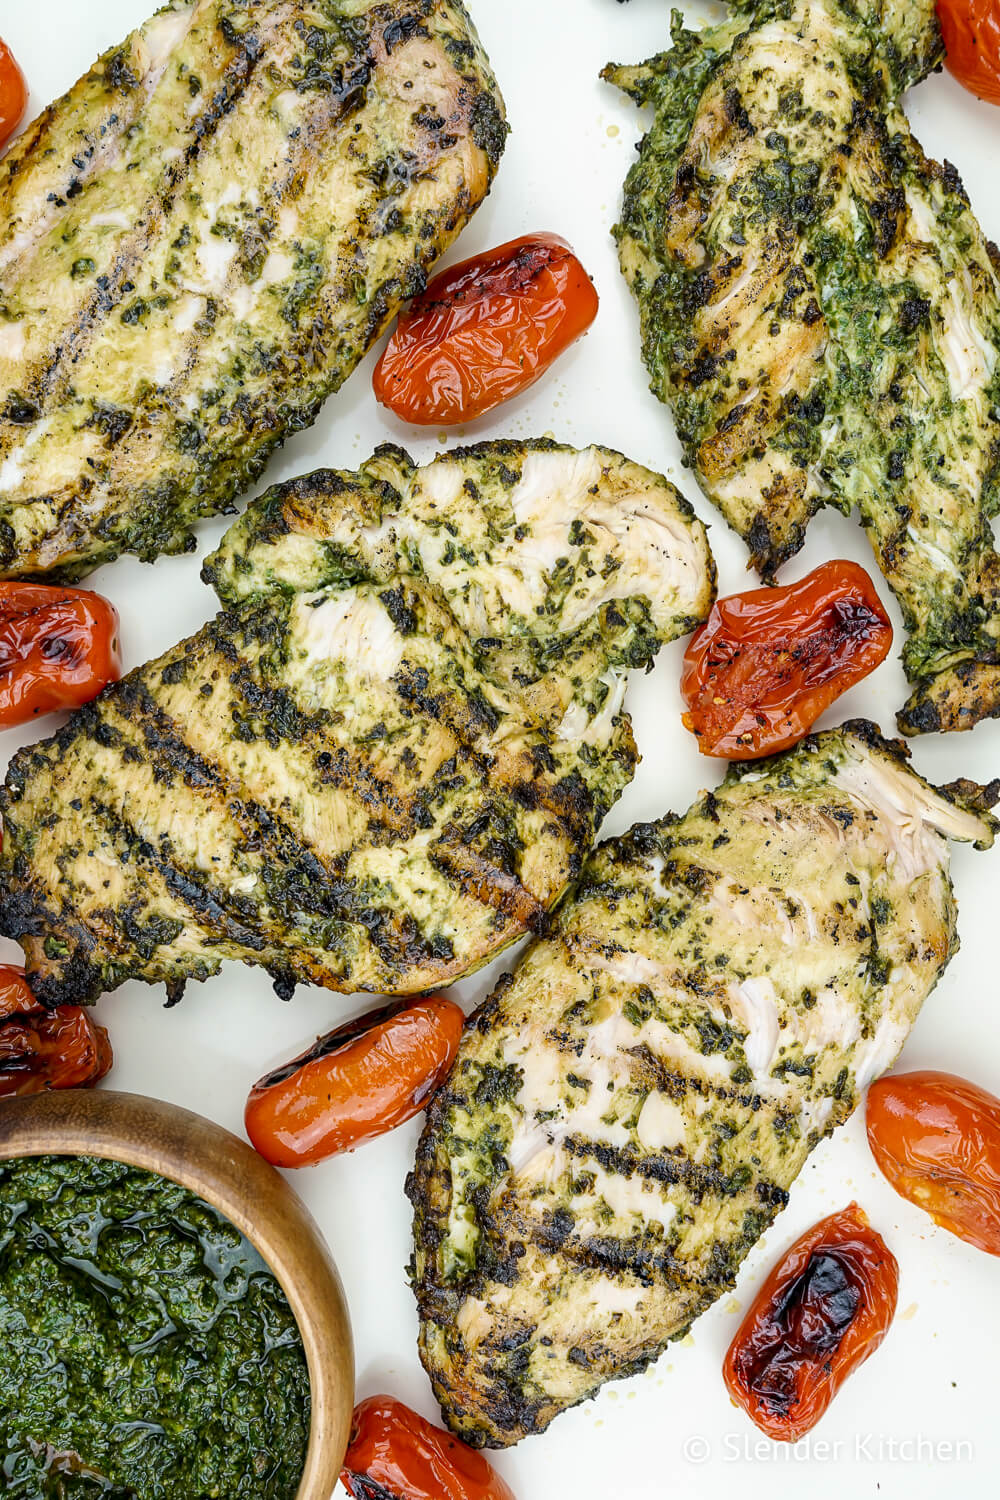 Pesto chicken with cherry tomatoes on a white baking sheet.